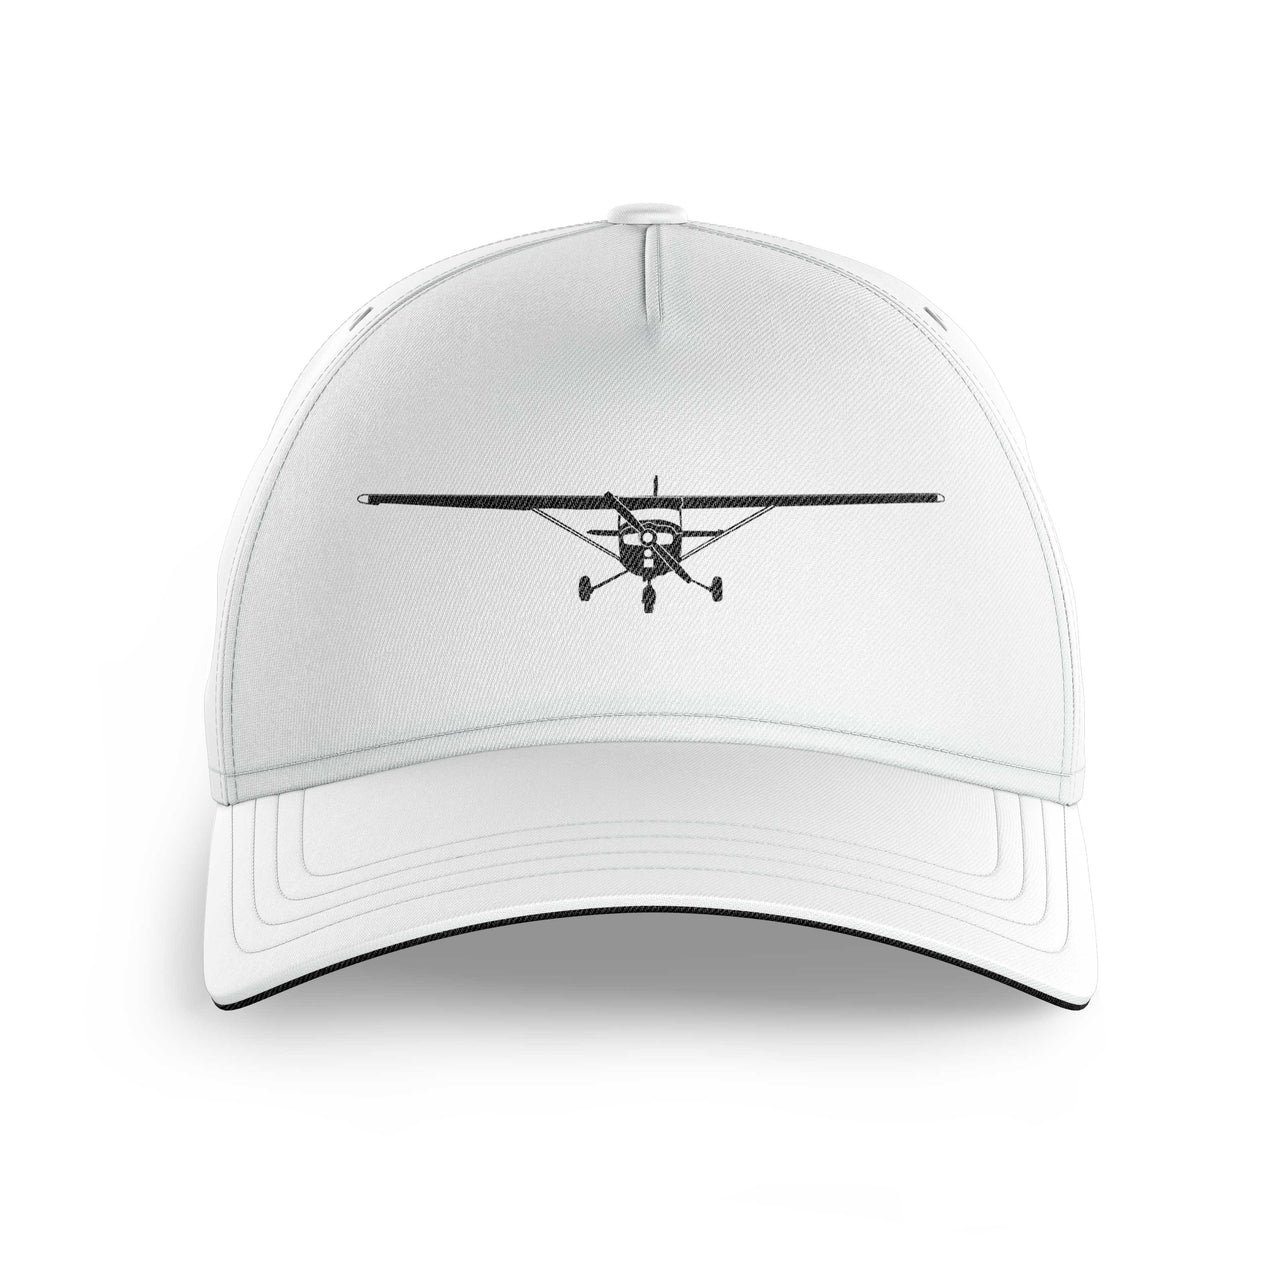 Cessna 172 Silhouette Printed Hats